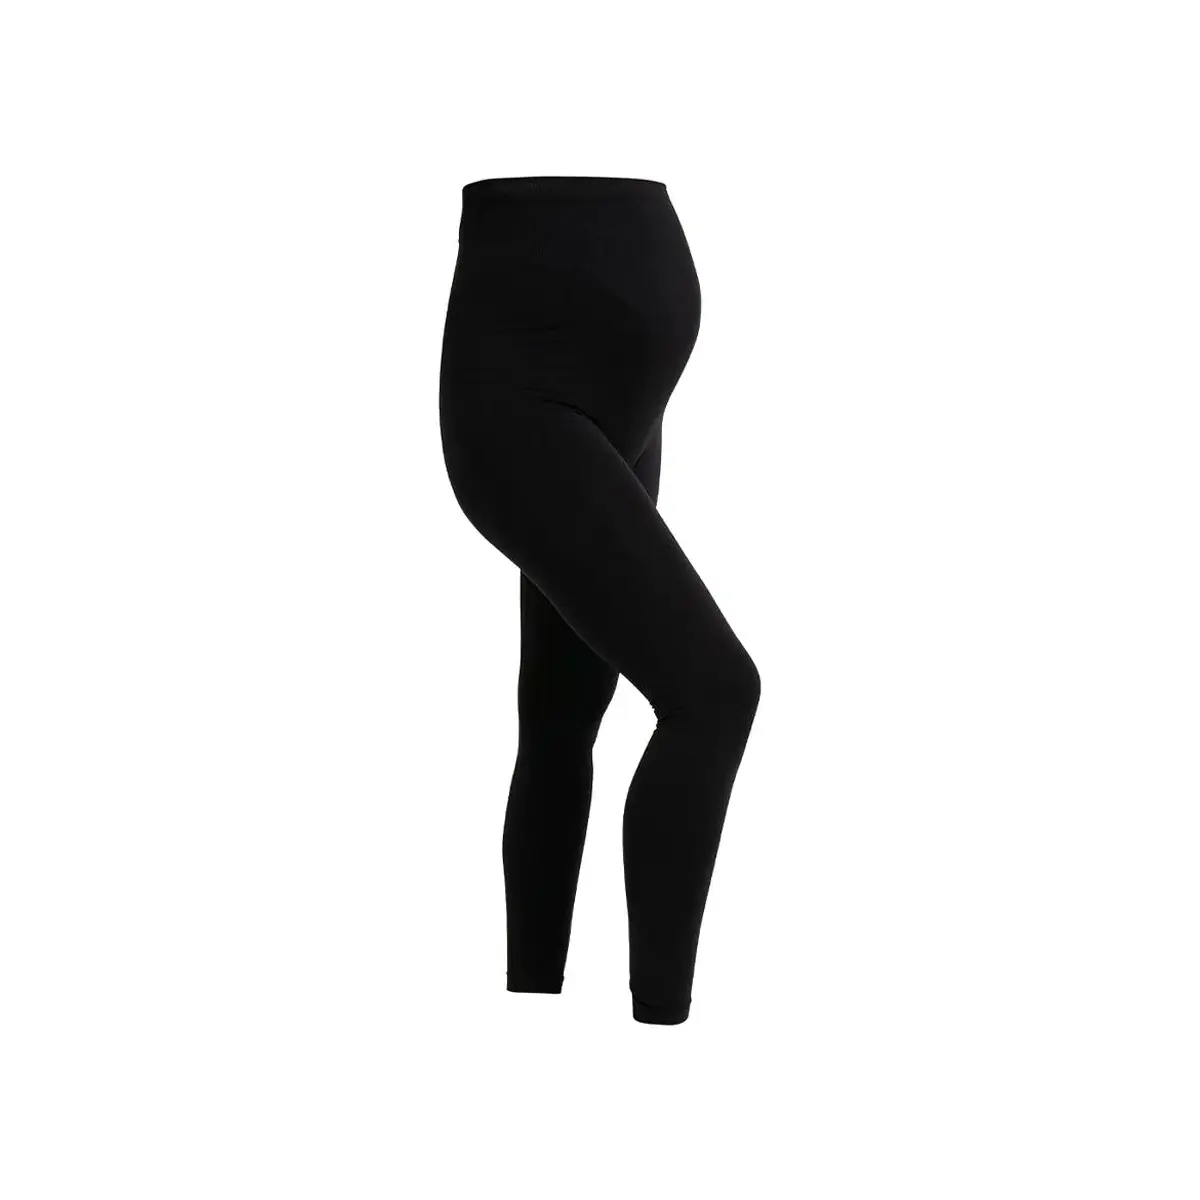 Image of Carriwell Maternity Support Leggings - Black (Size - X-LARGE)